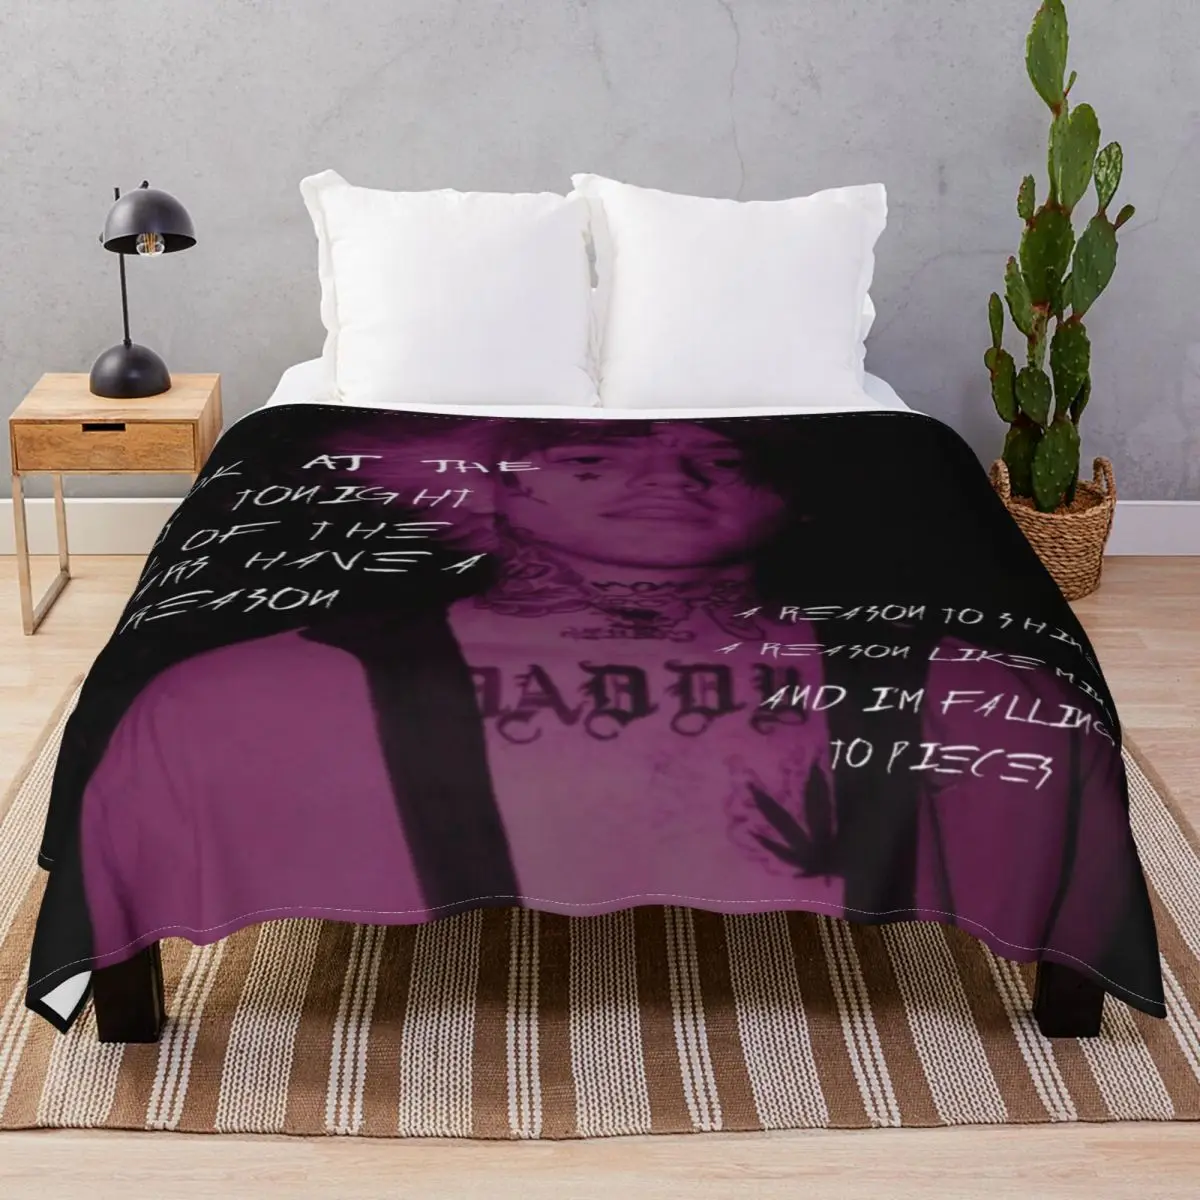 Lyrics Signed Photo Blankets Coral Fleece Spring/Autumn Ultra-Soft Throw Blanket for Bedding Home Couch Travel Cinema